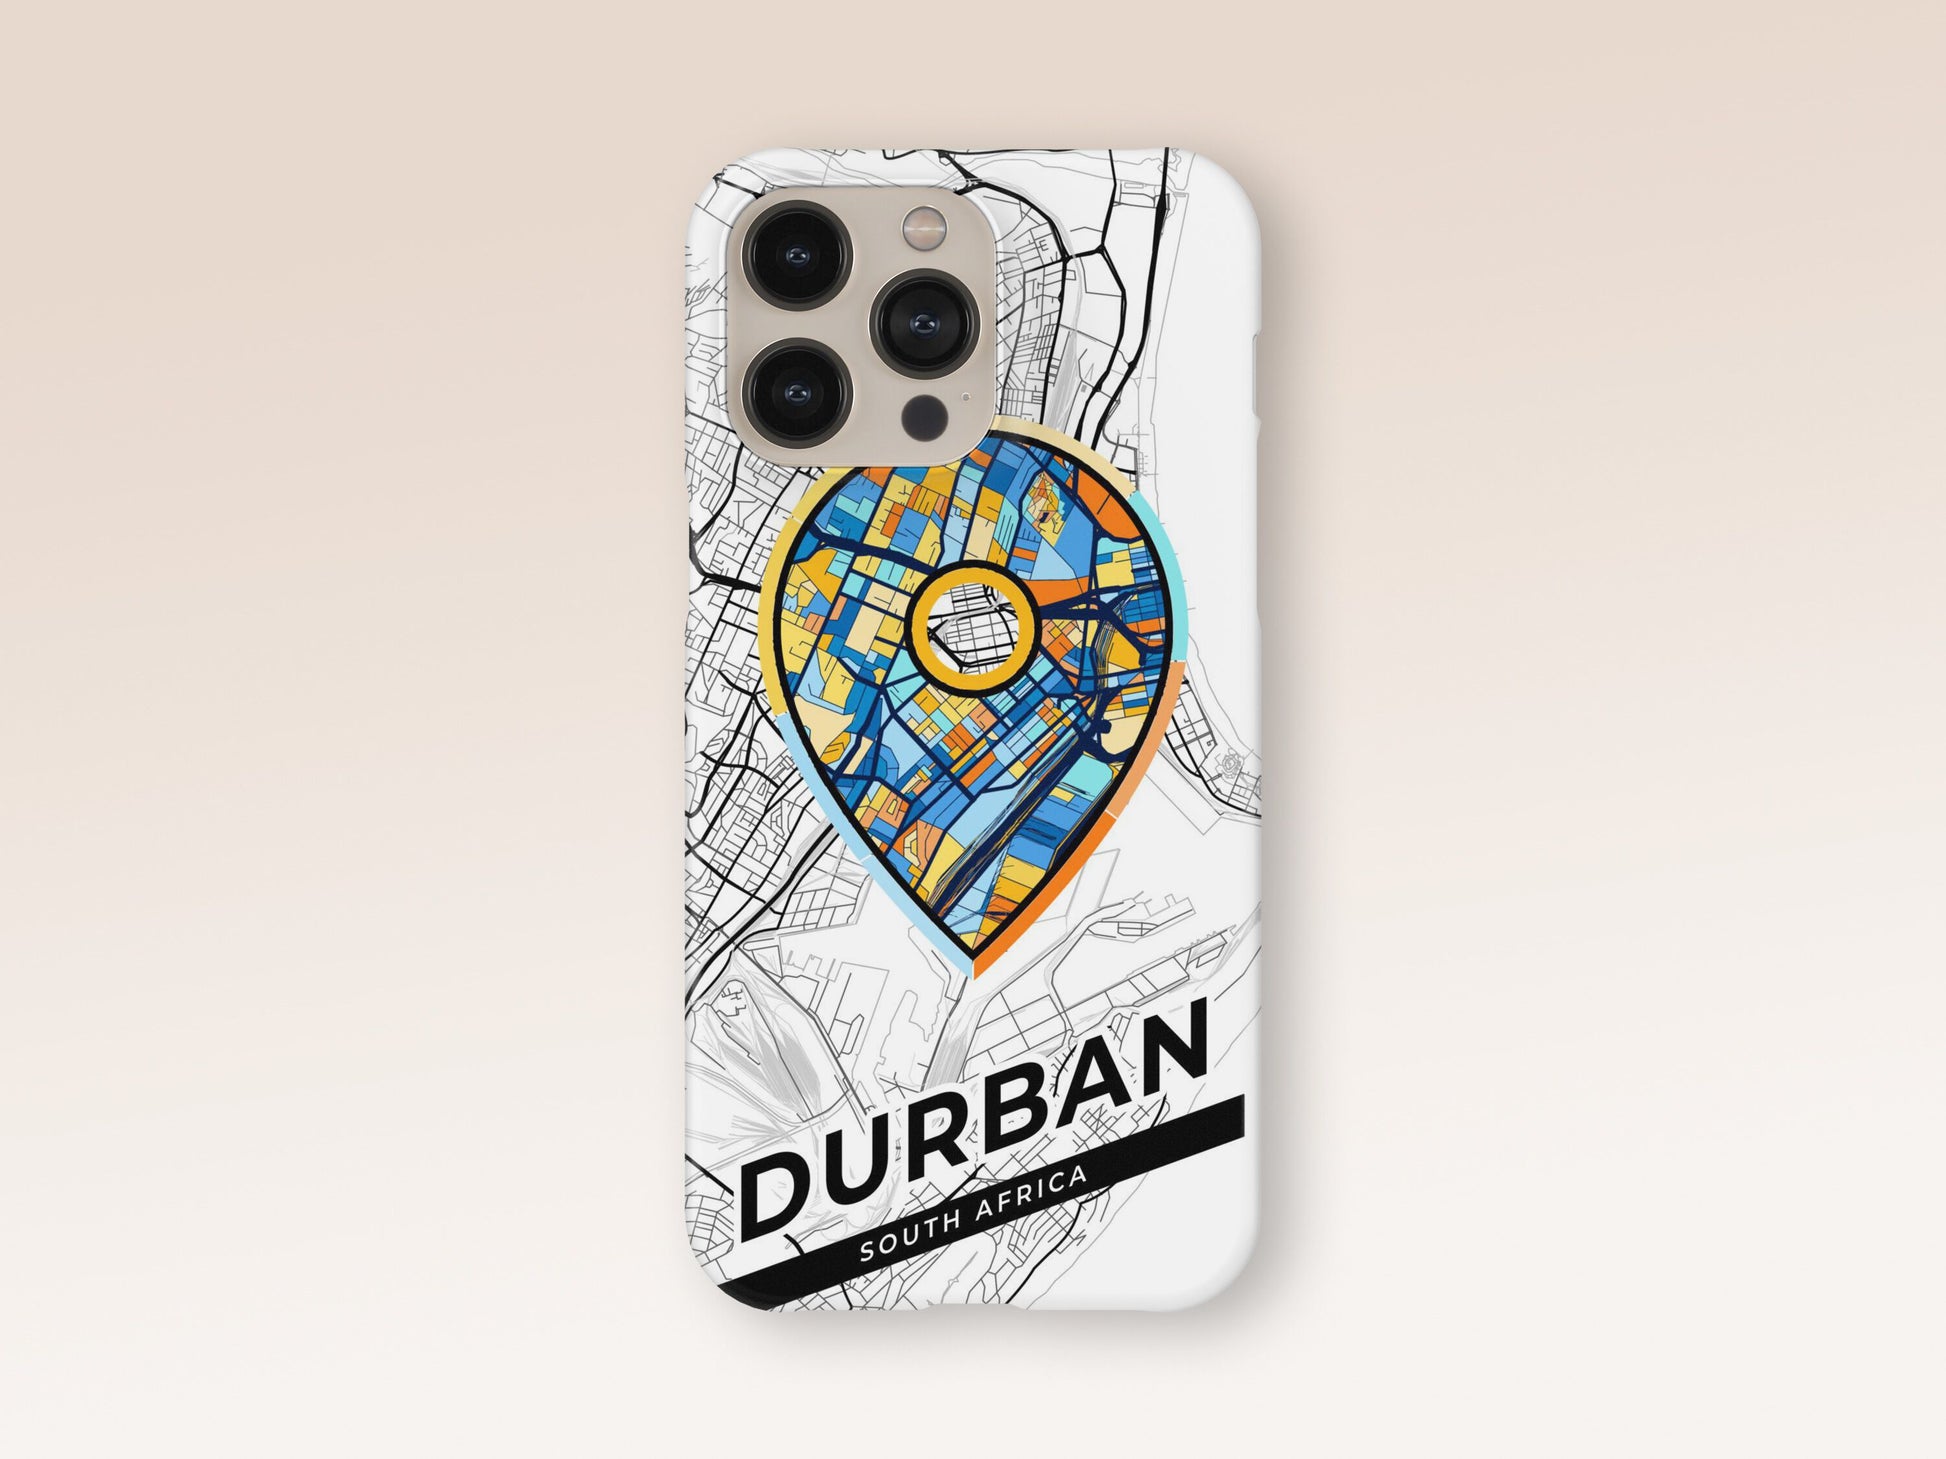 Durban South Africa slim phone case with colorful icon. Birthday, wedding or housewarming gift. Couple match cases. 1